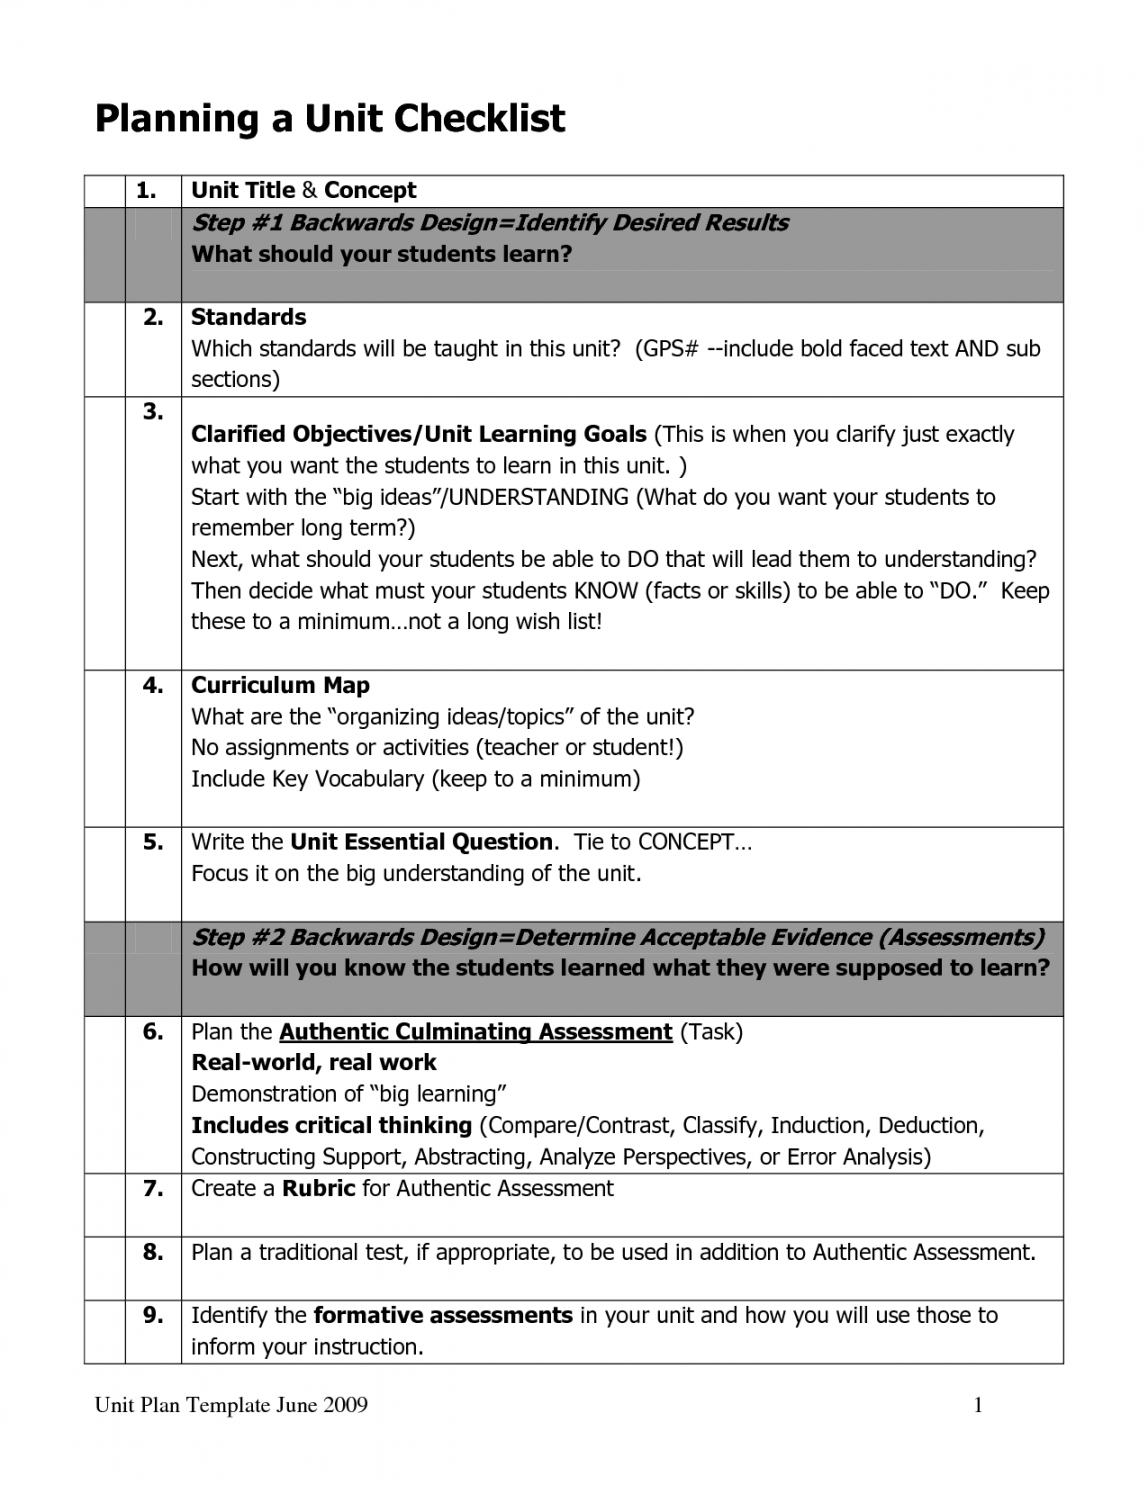 free unit plan template  unit_plan_template_2009  teaching ideas  unit task analysis template for special education example